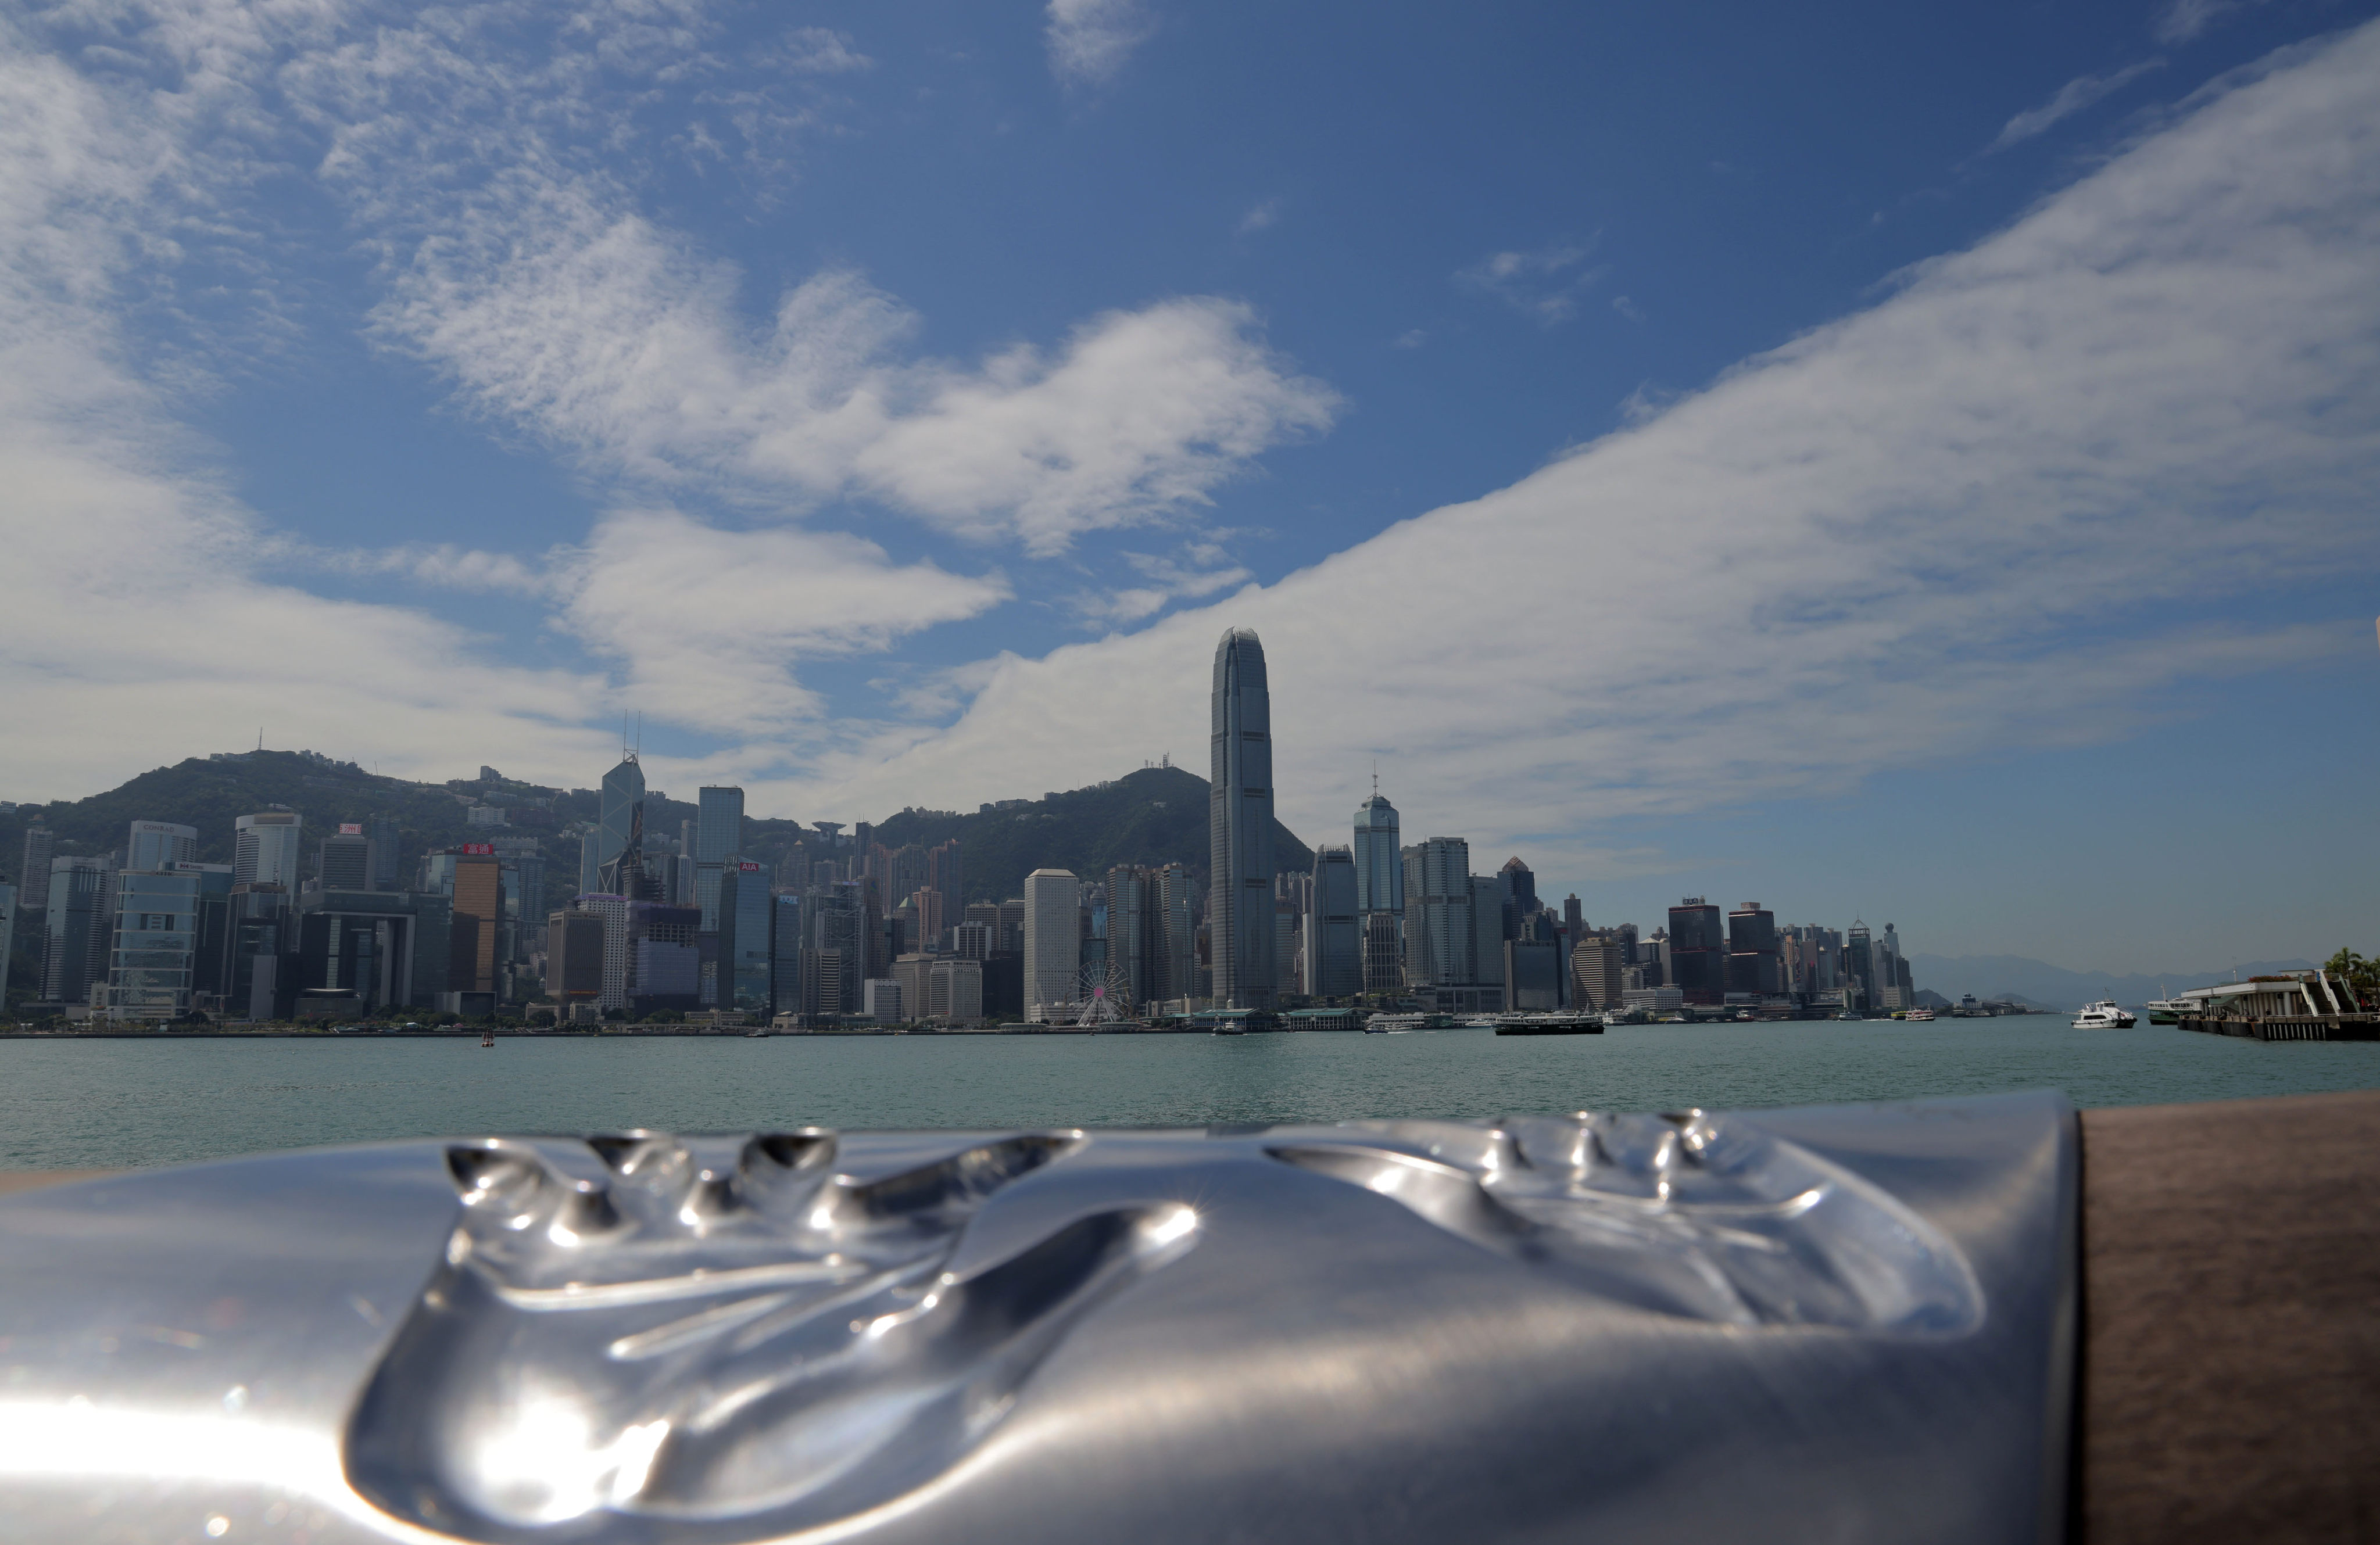 Hong Kong has seen its fair share of family disputes, especially among the city’s wealthiest. Photo: Jelly Tse